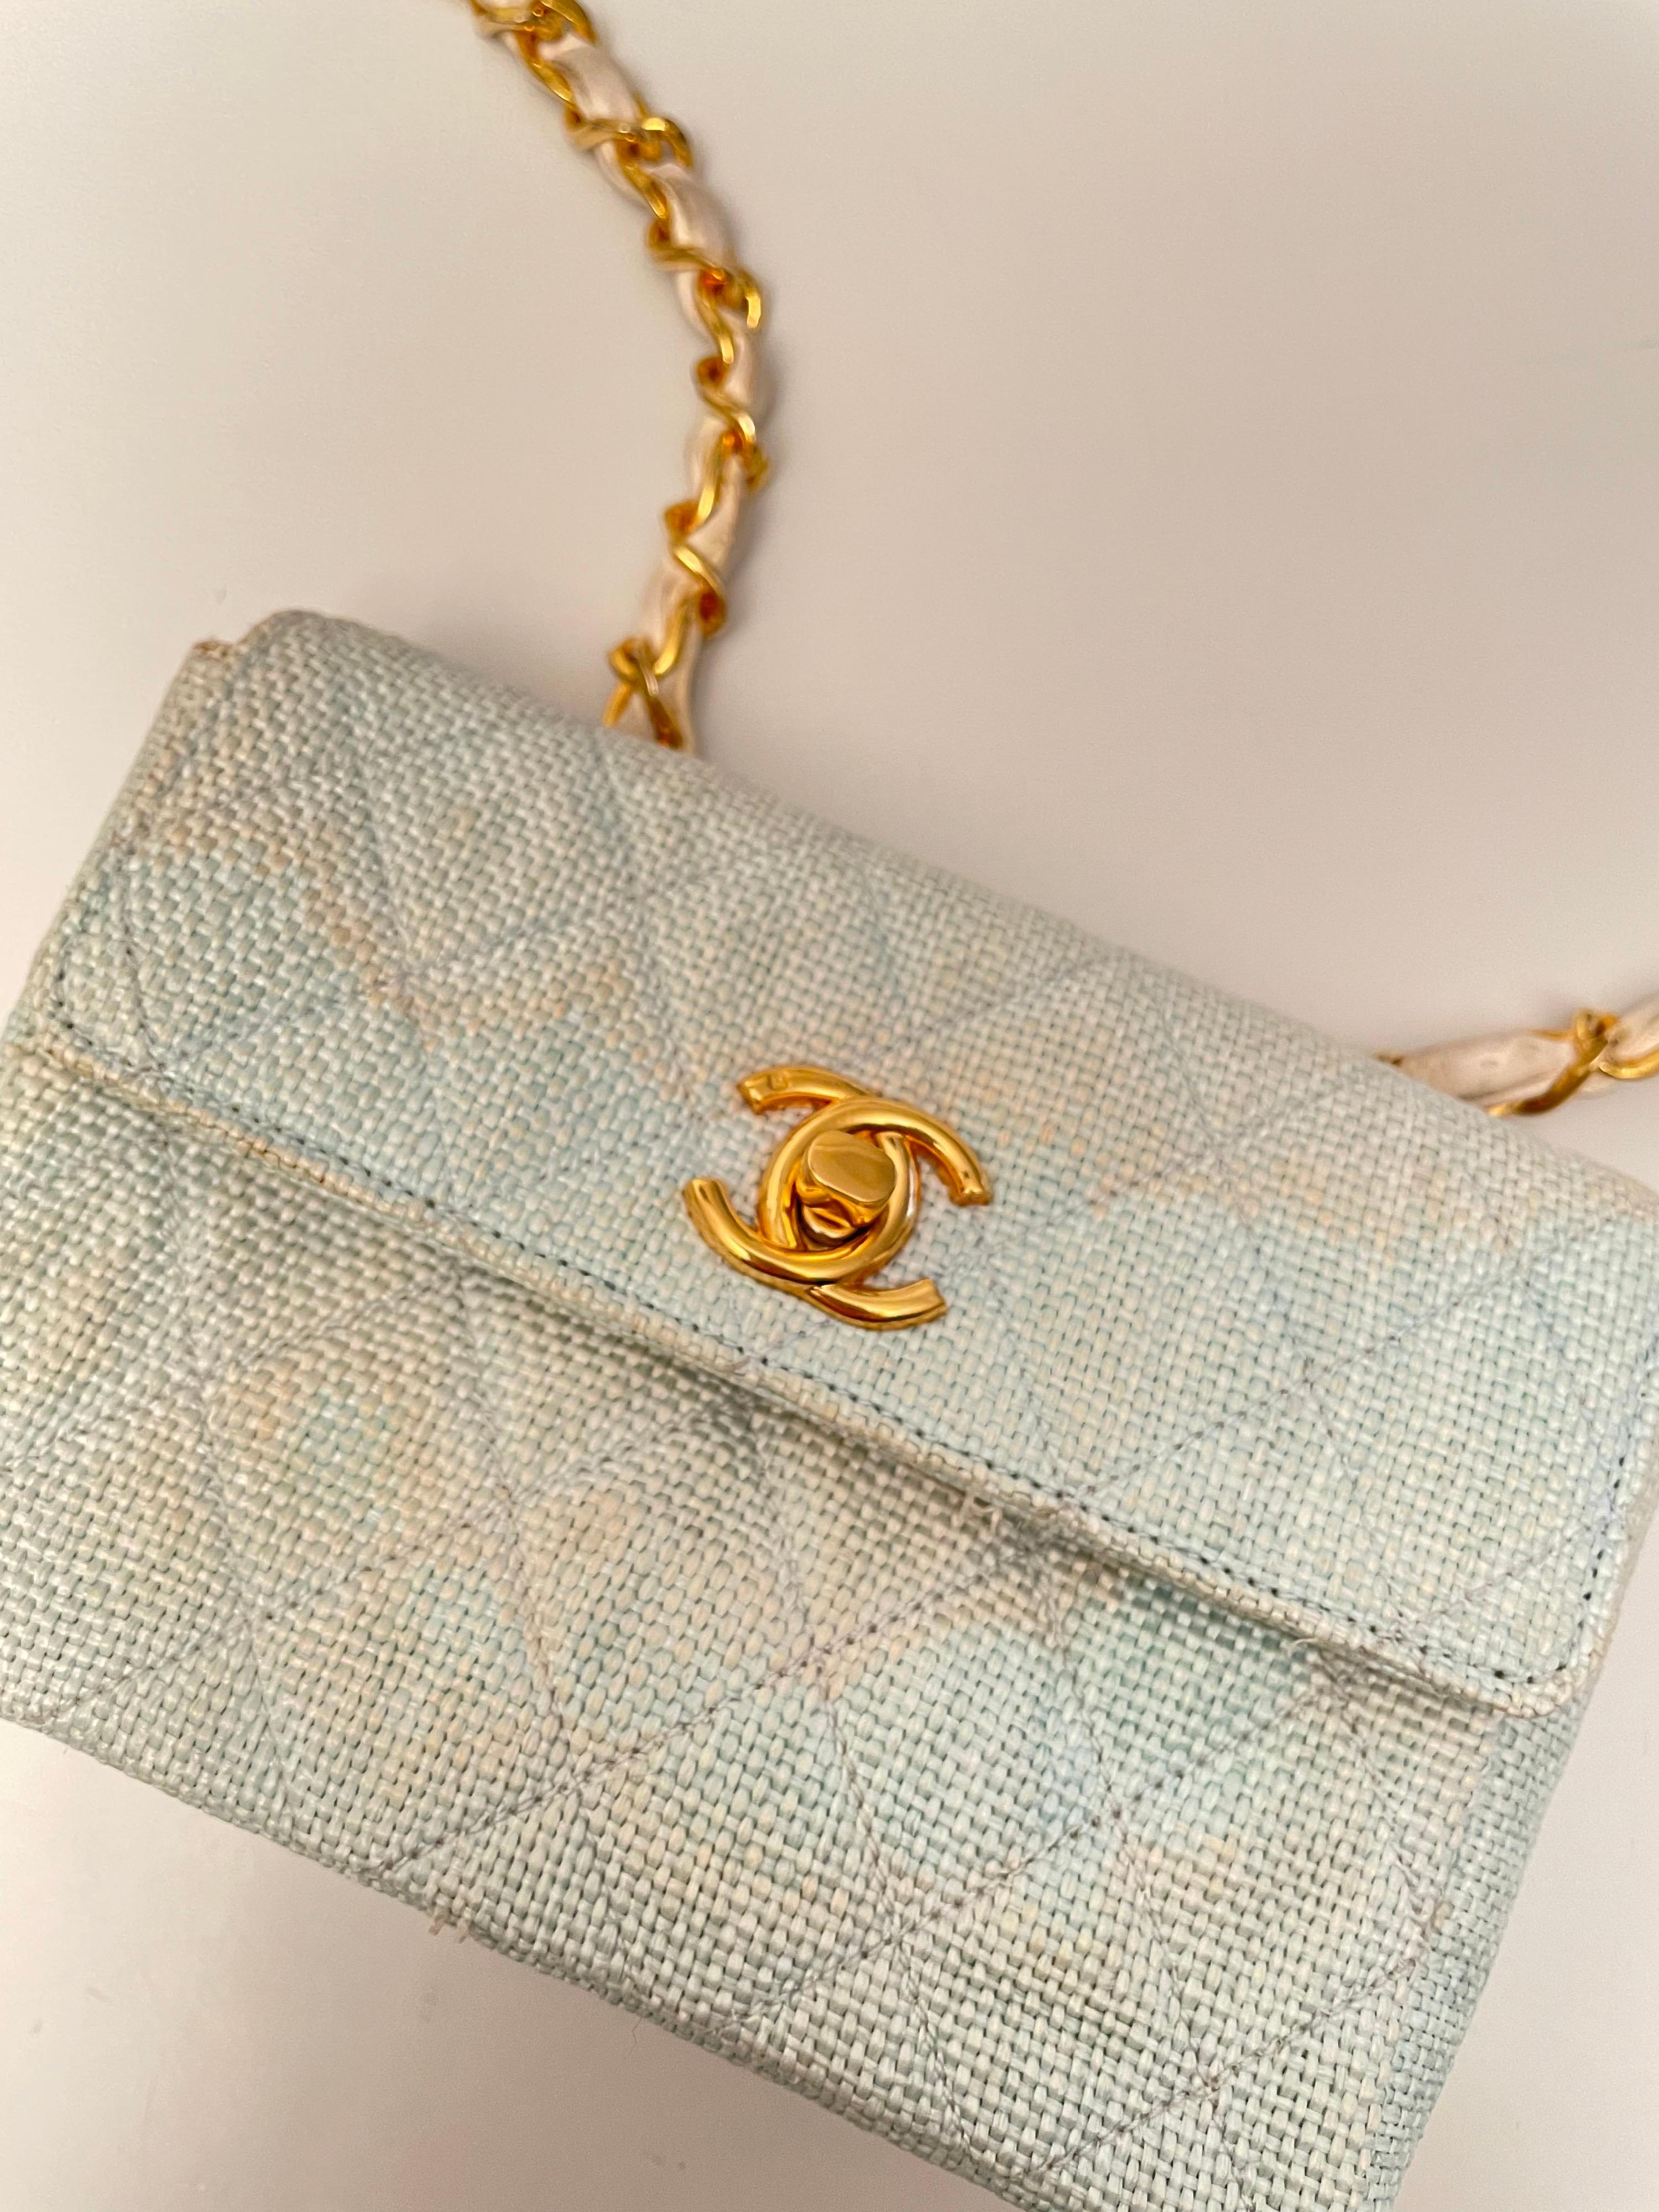 Beige Chanel 70s light blue canvas small Bag